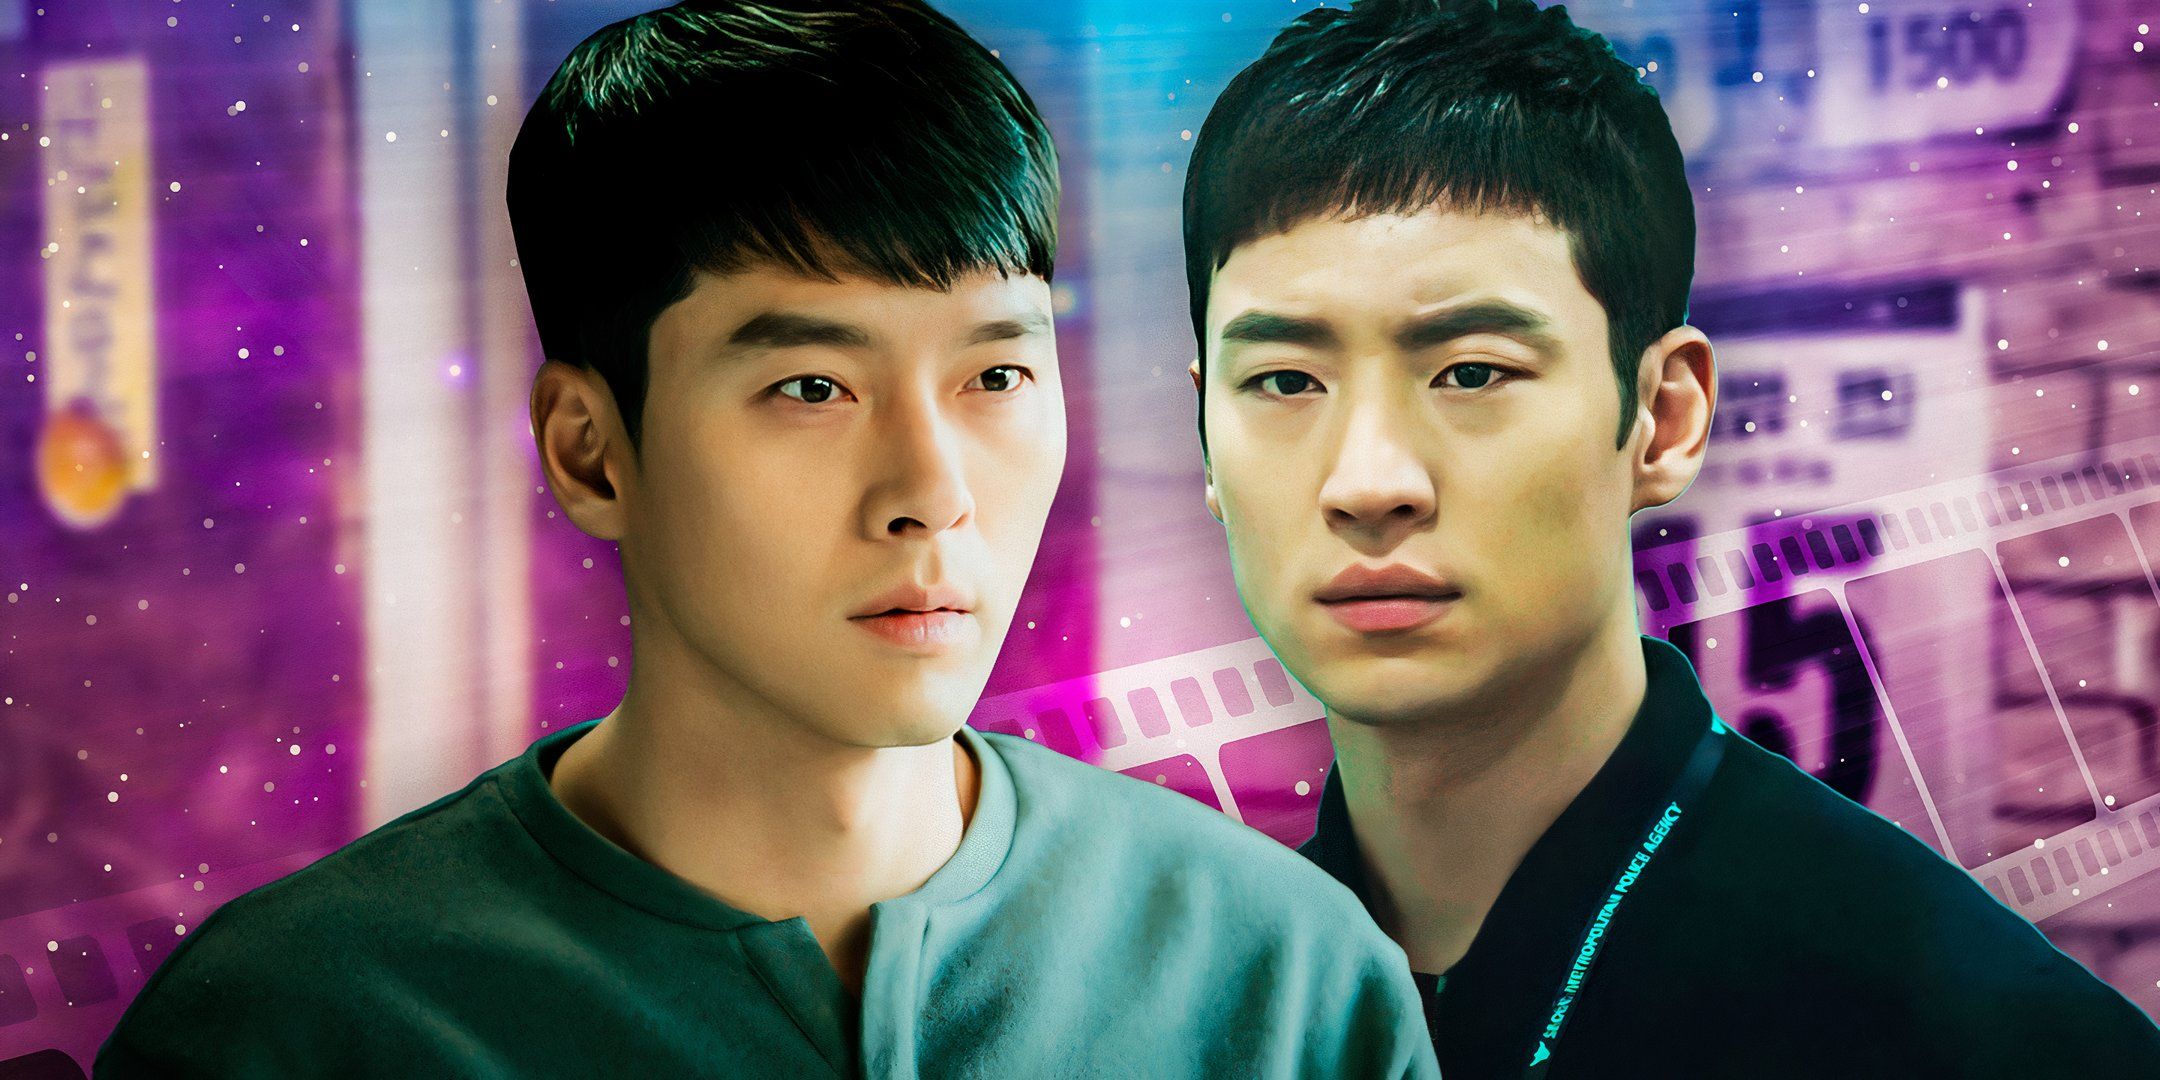 (Hyun-Bin-as-Ri-Jeong-hyeok)-from-Crash-Landing-on-You-and-(Lee-Jehoon-as-Park-Hae-yeong)-from-Signal